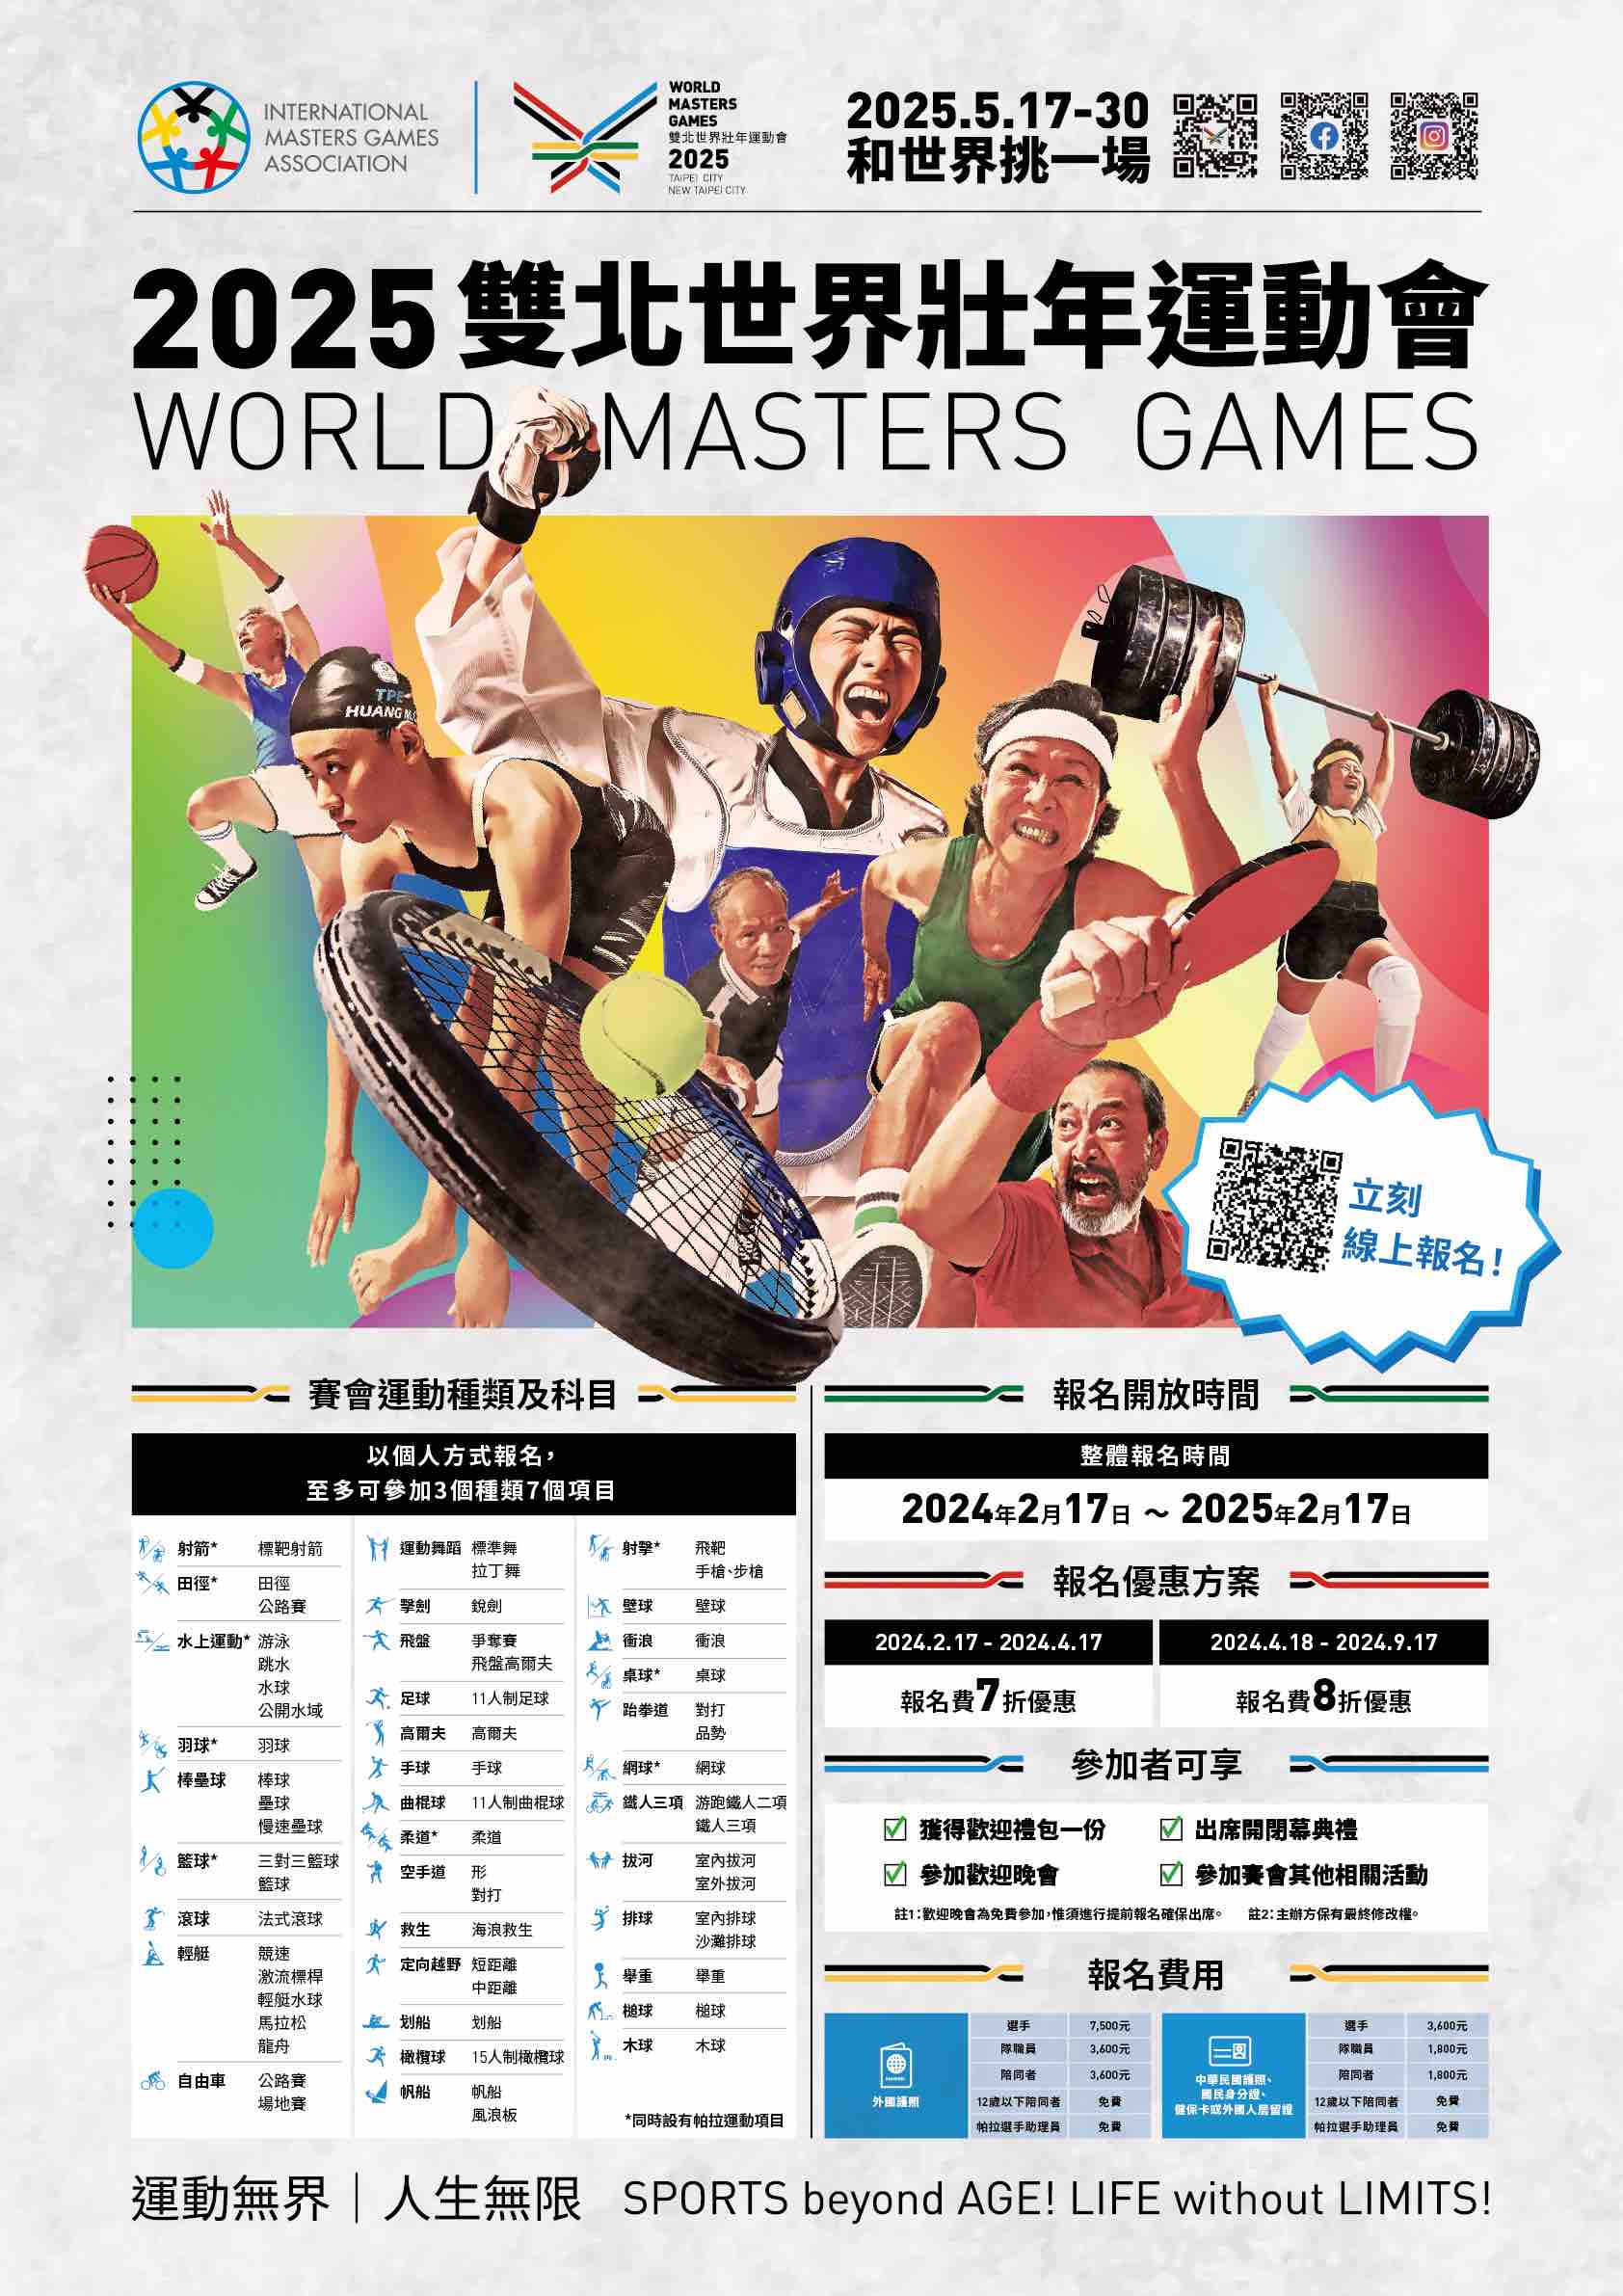 2025 World Masters Games Registration Now Open!